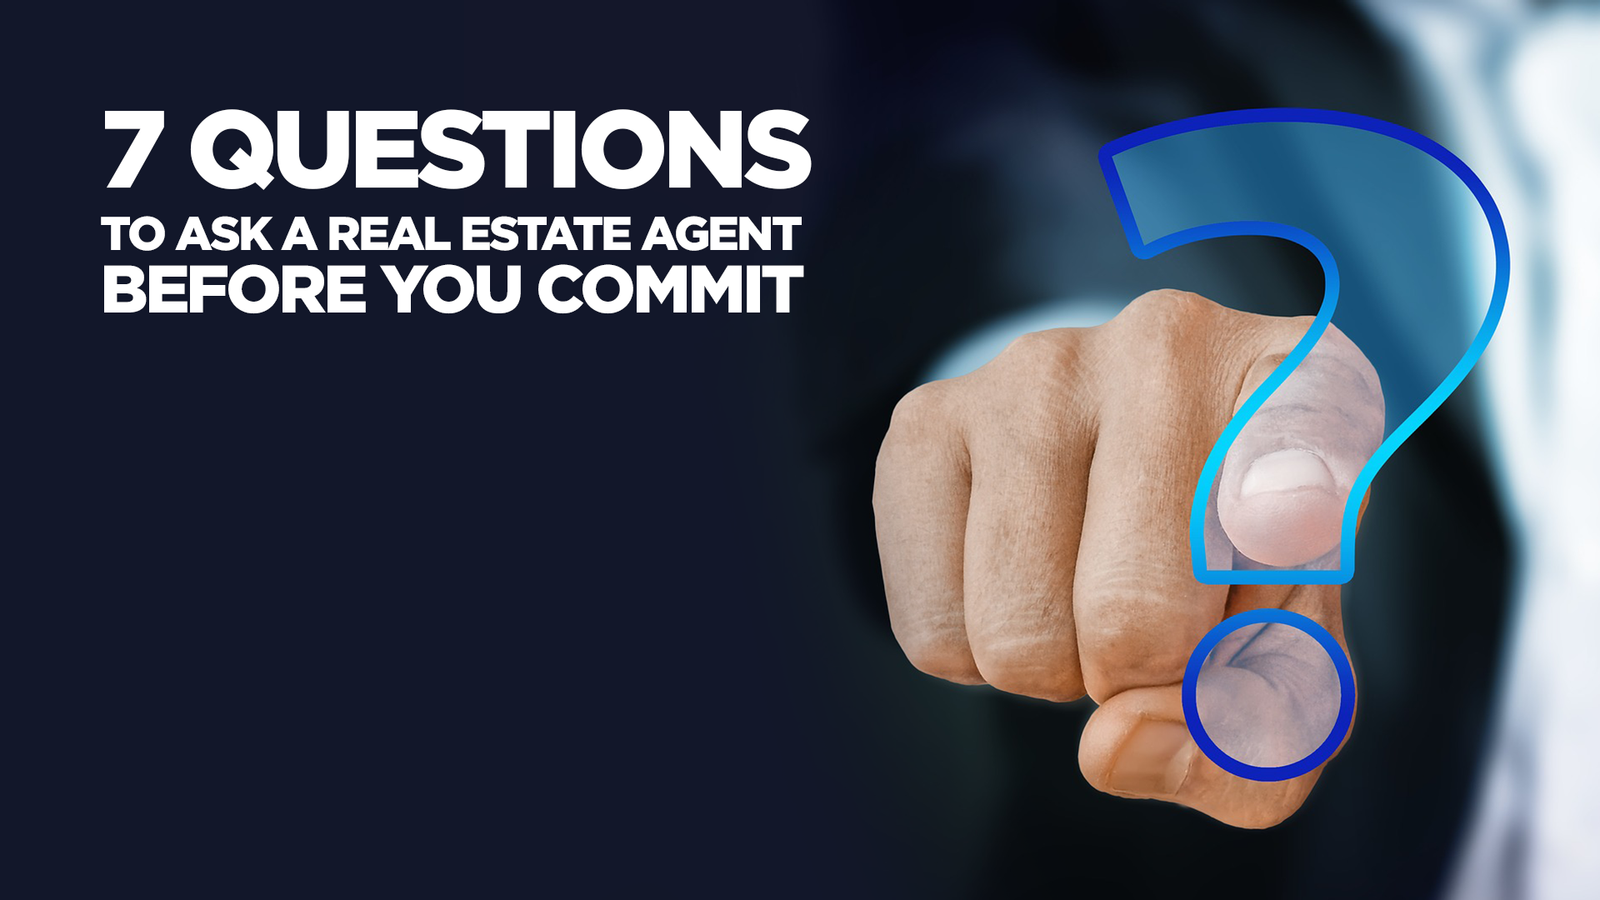 7 Questions to Ask a Real Estate Agent Before You Commit